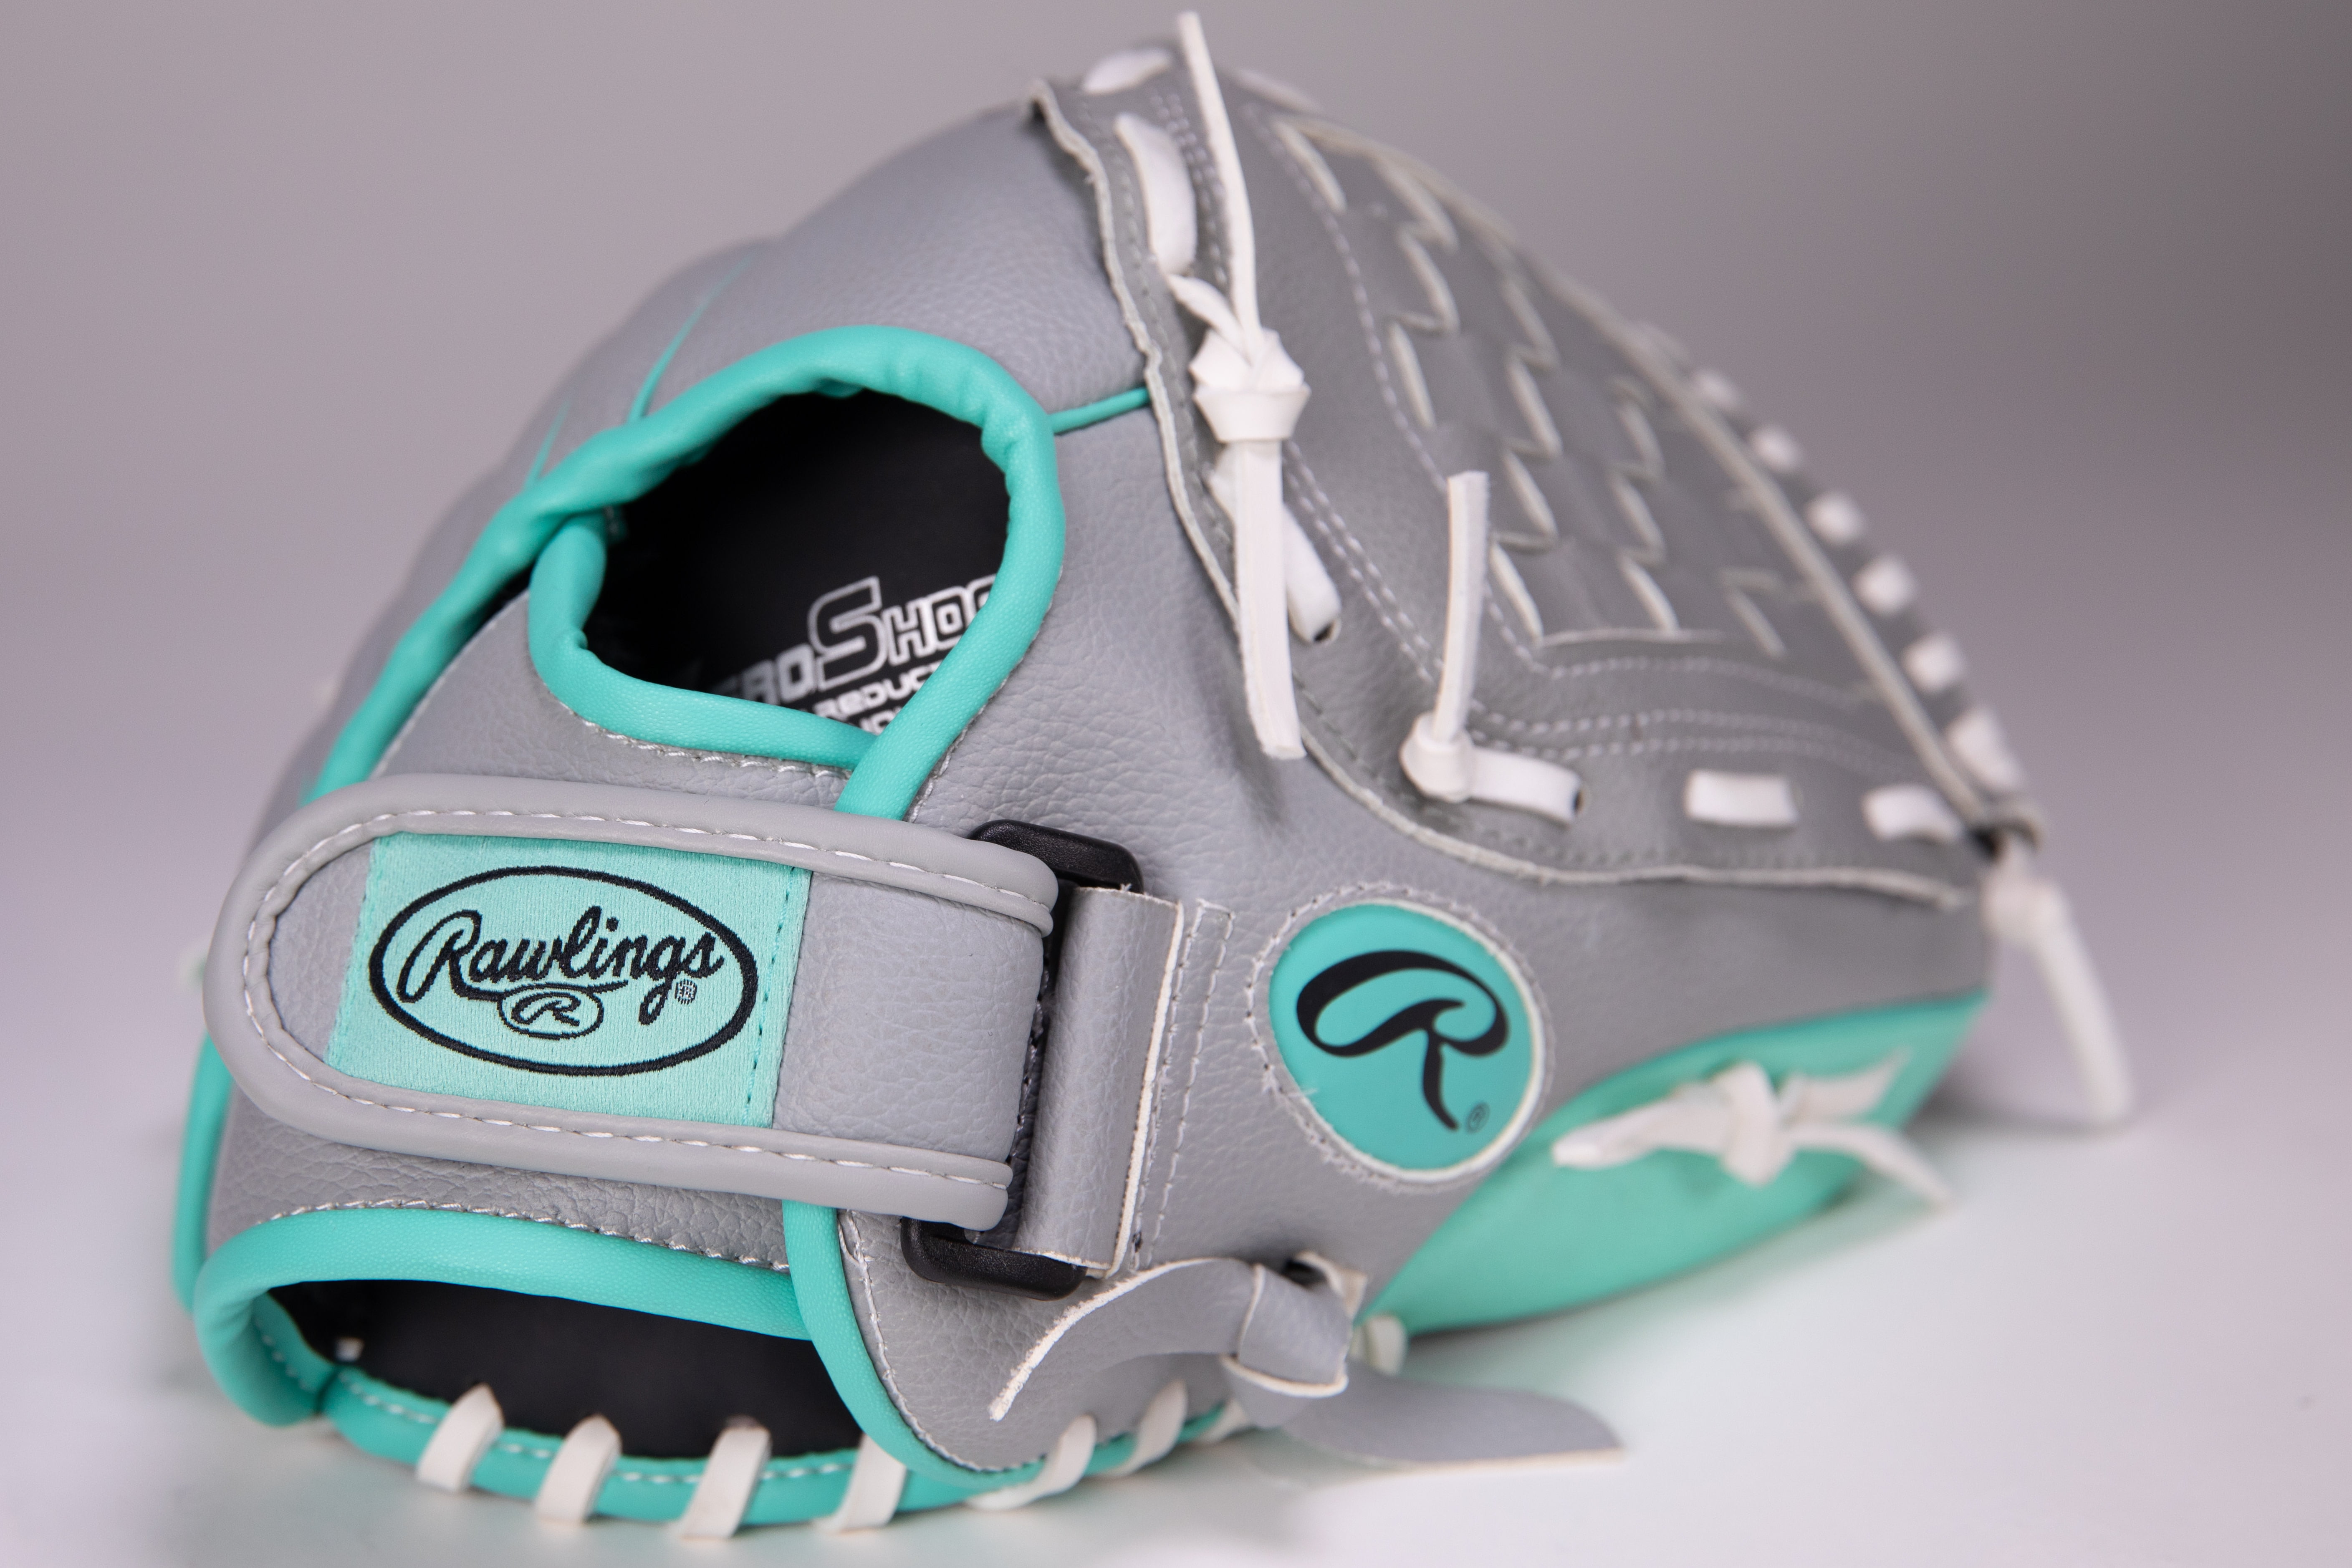 Rawlings Players Series Youth 9